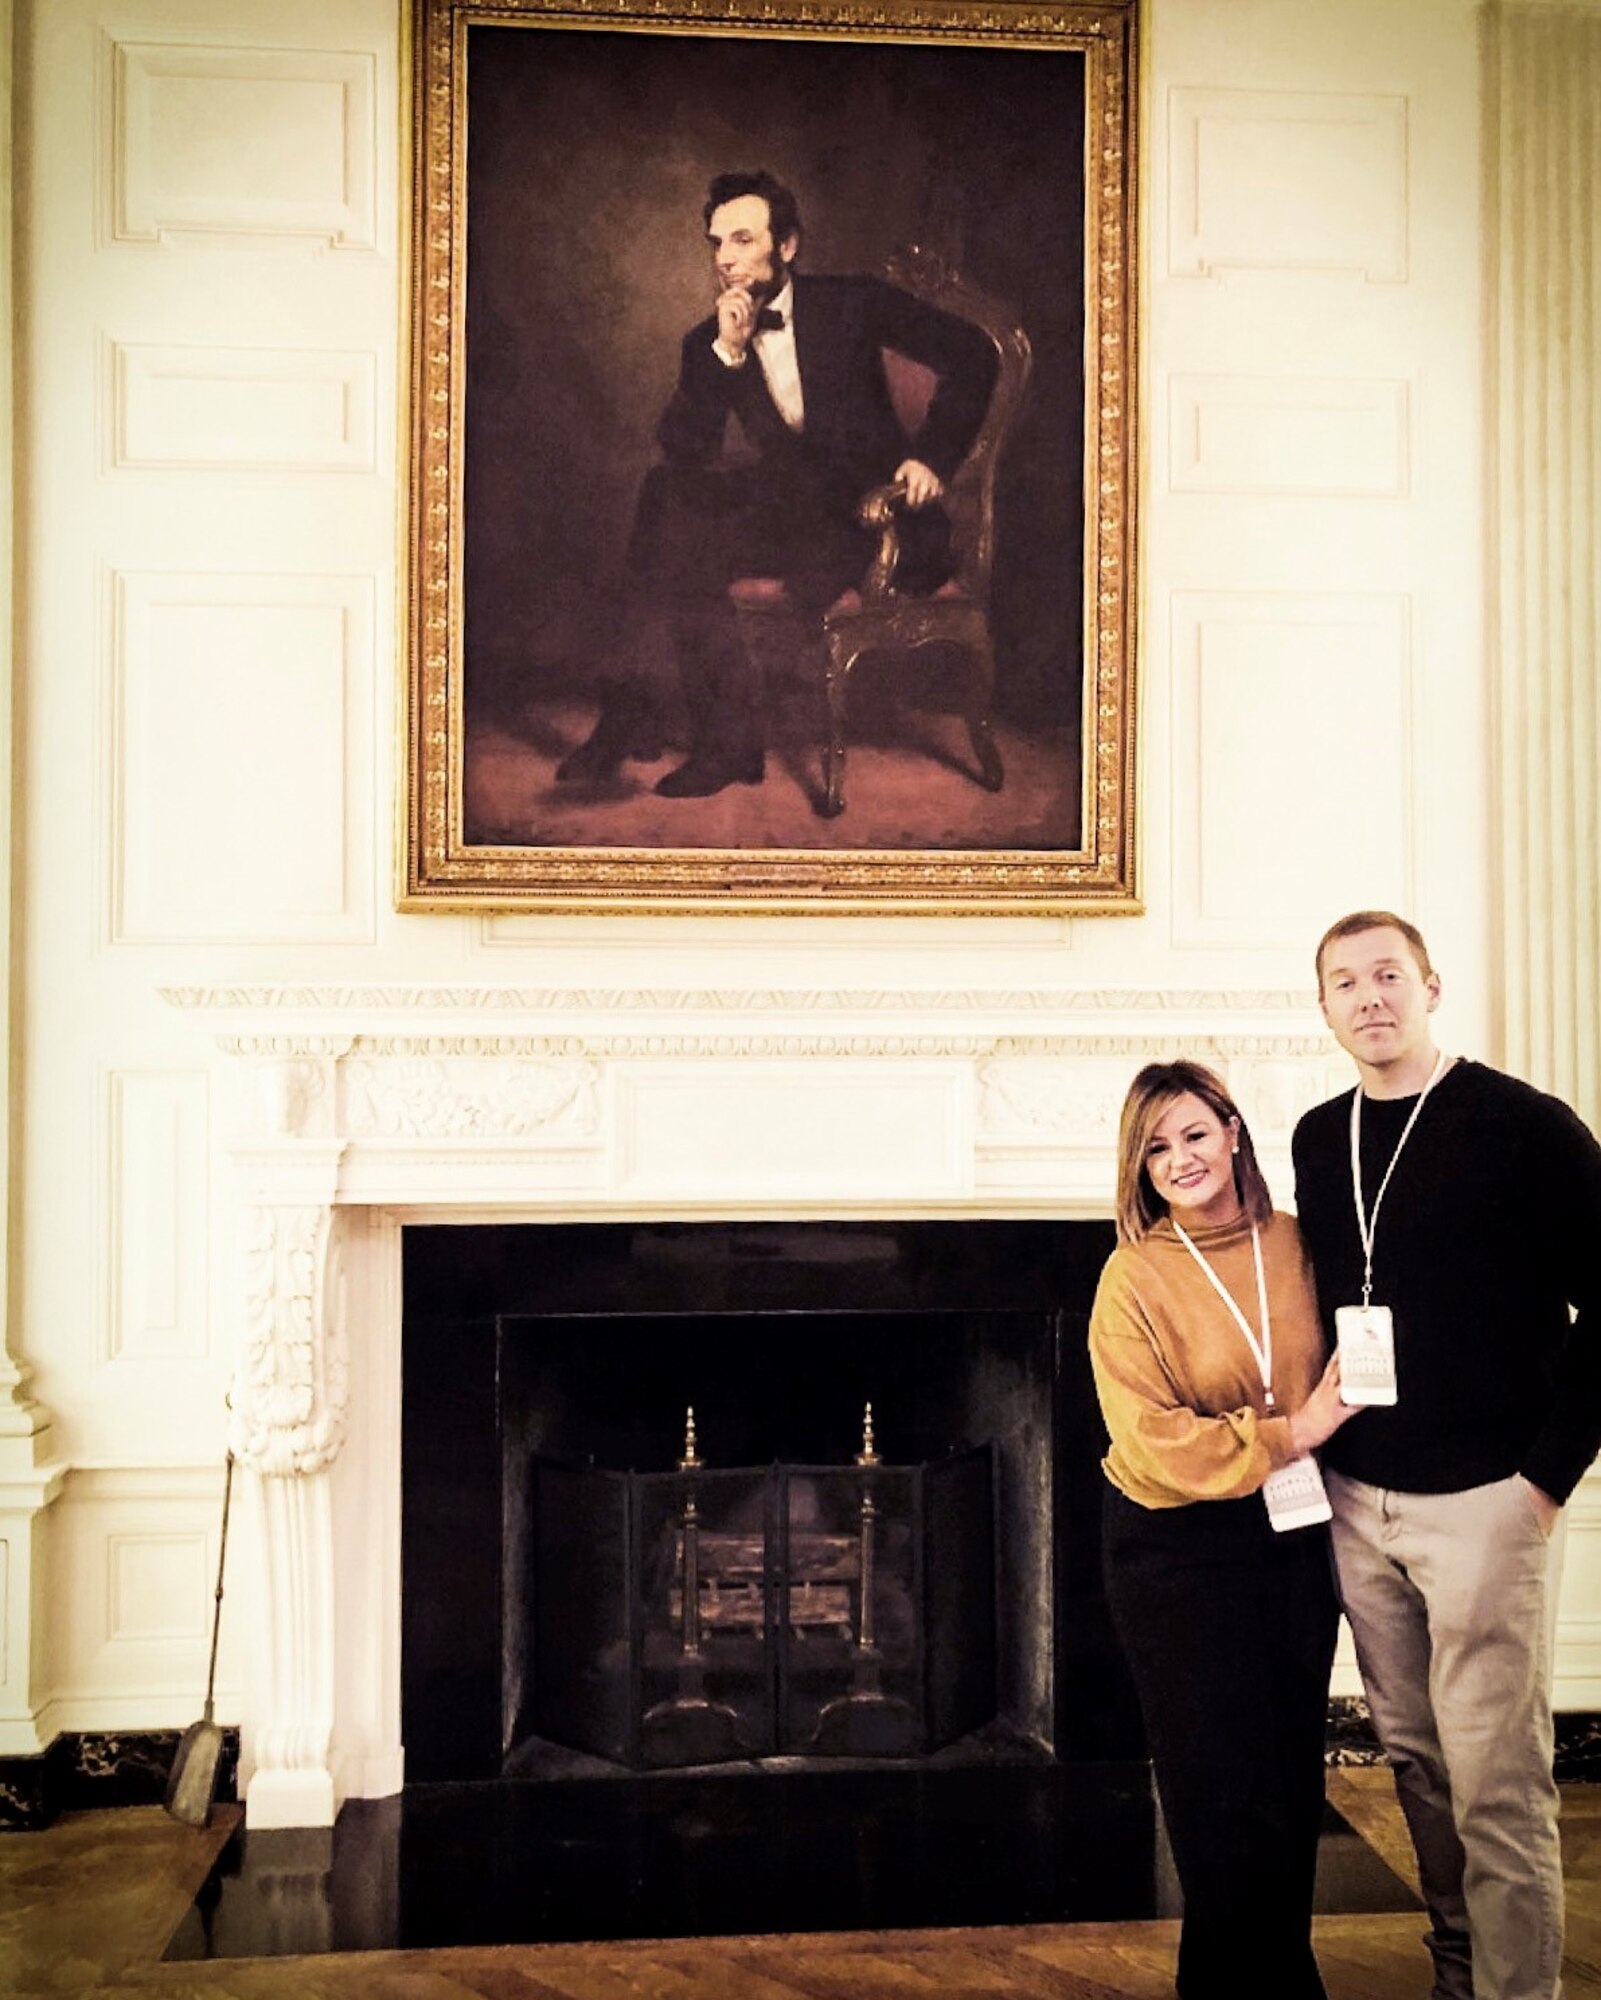 Volunteers stand inside the White House.